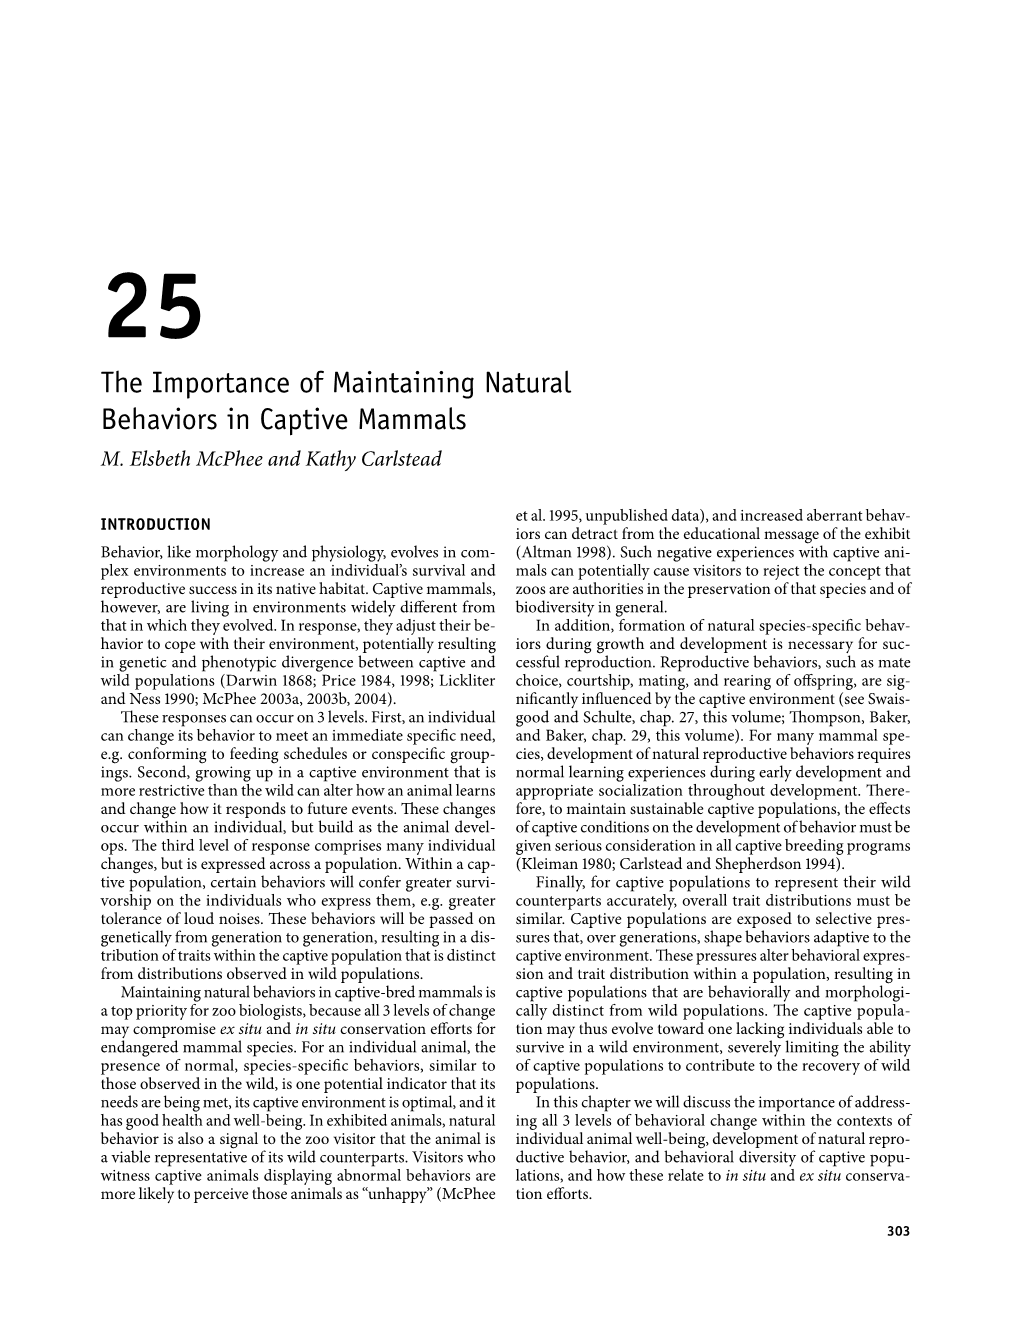 The Importance of Maintaining Natural Behaviors in Captive Mammals M